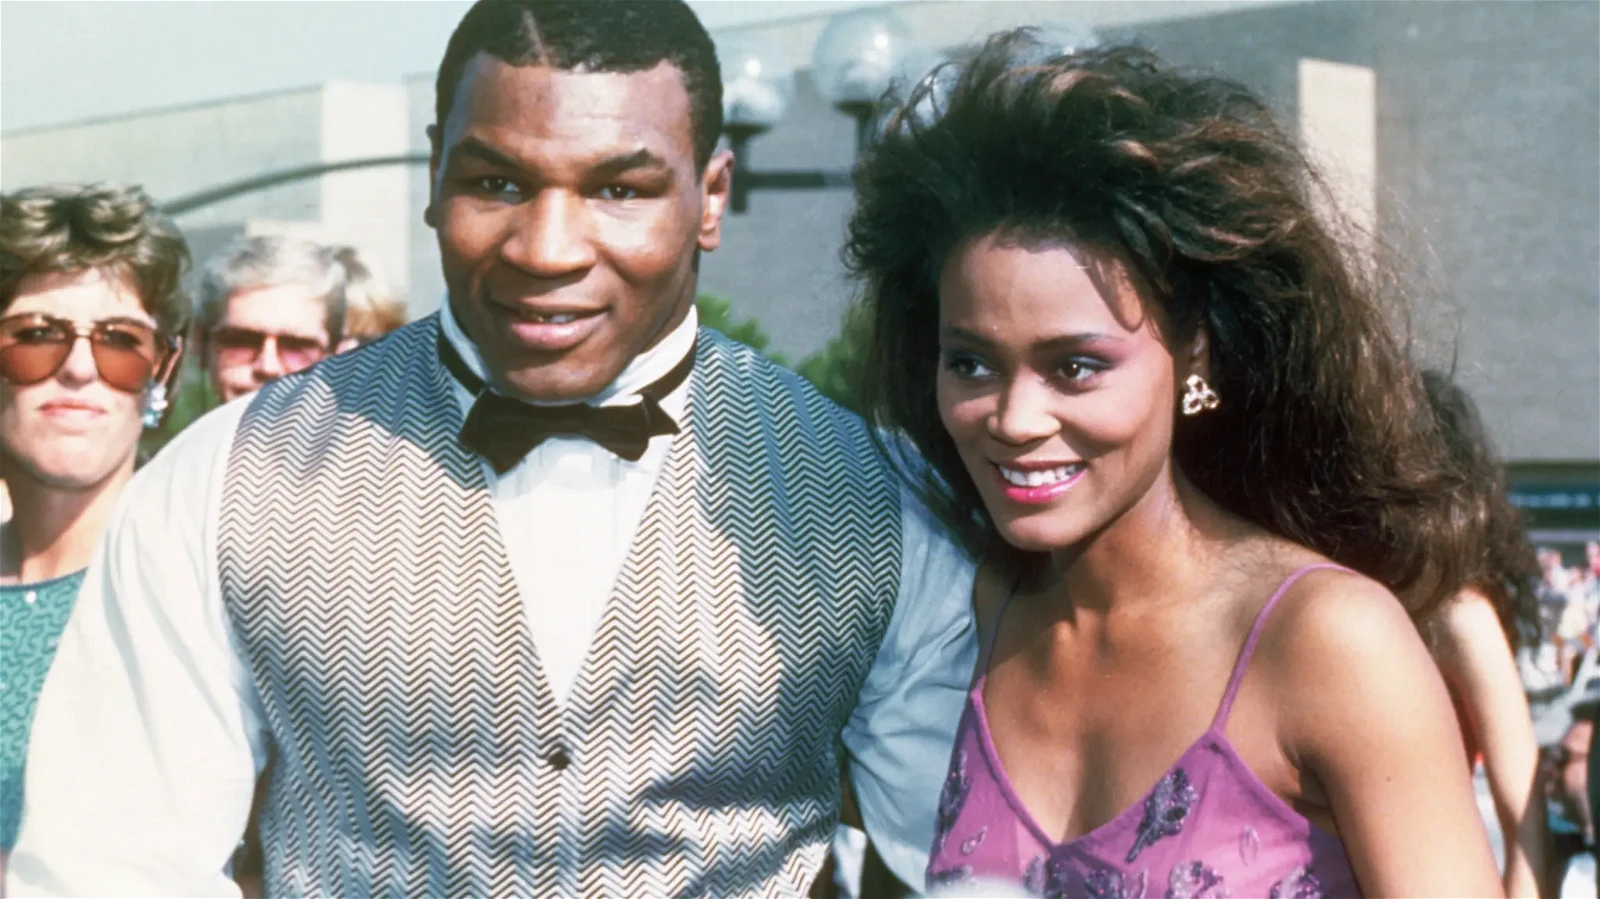 Tyson with ex-wife Robin Givens